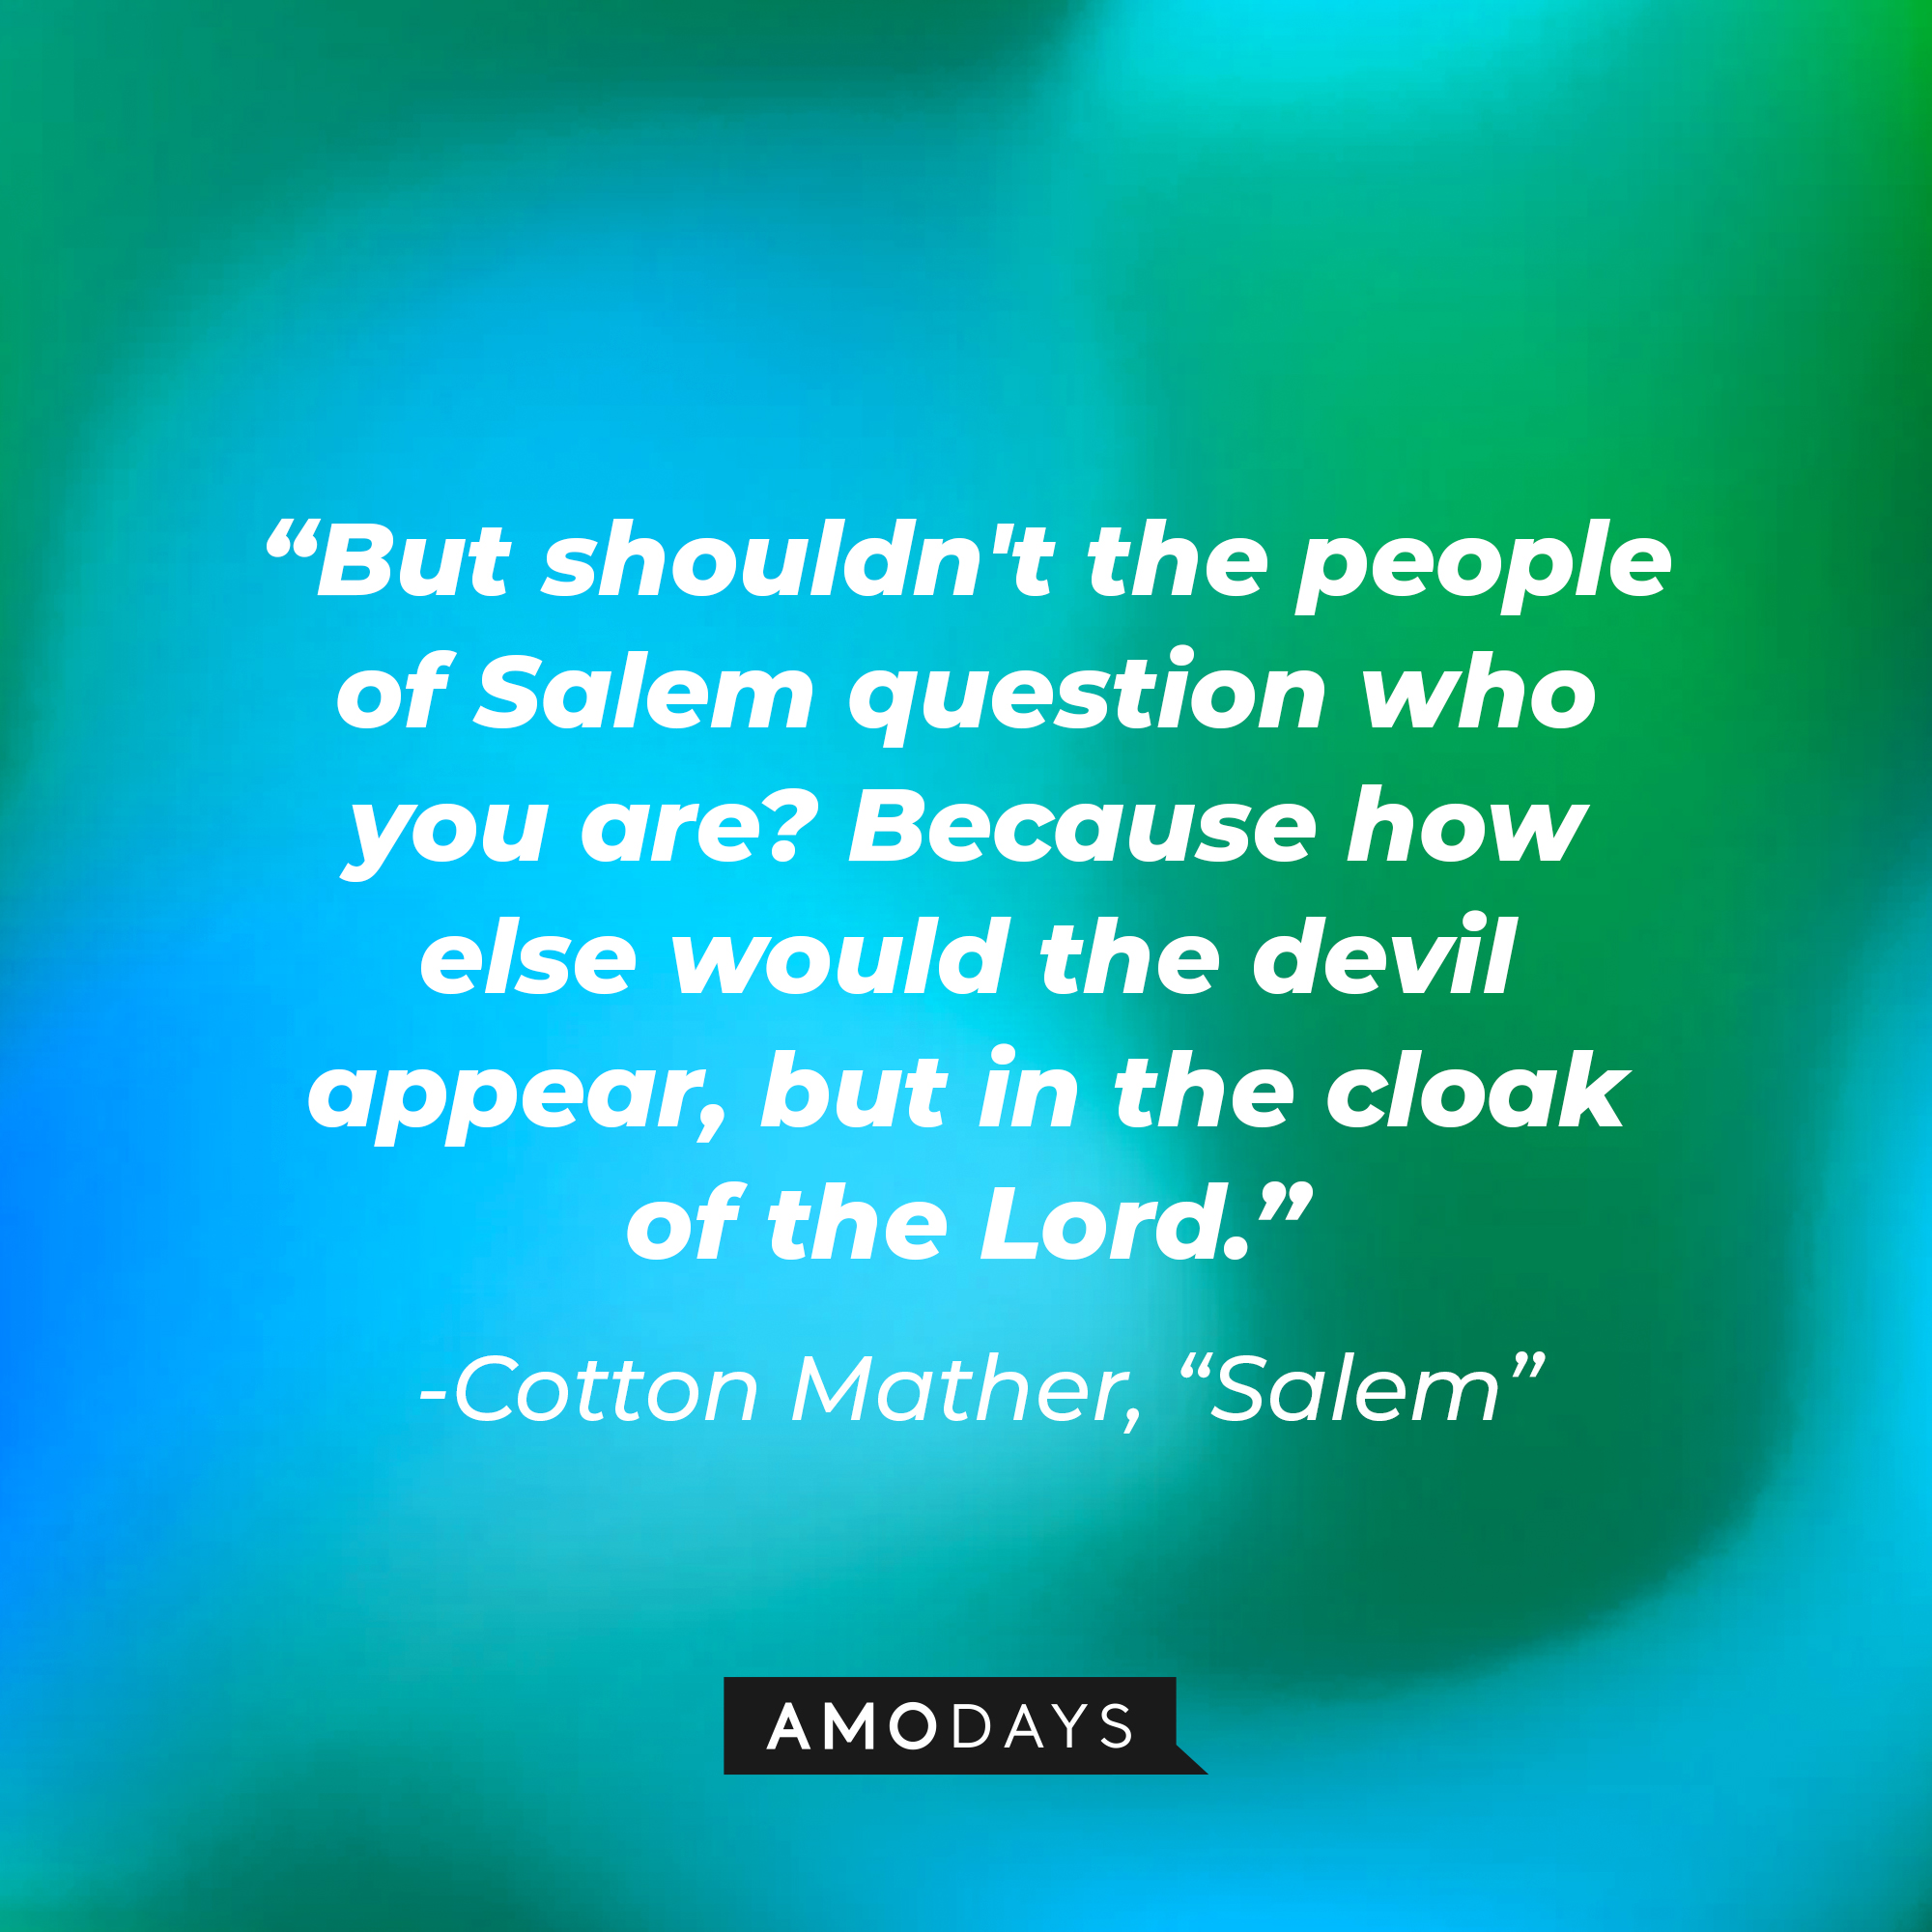 Cotton Mather's quote: "But shouldn't the people of Salem question who you are? Because how else would the devil appear, but in the cloak of the Lord." | Source: Amodays